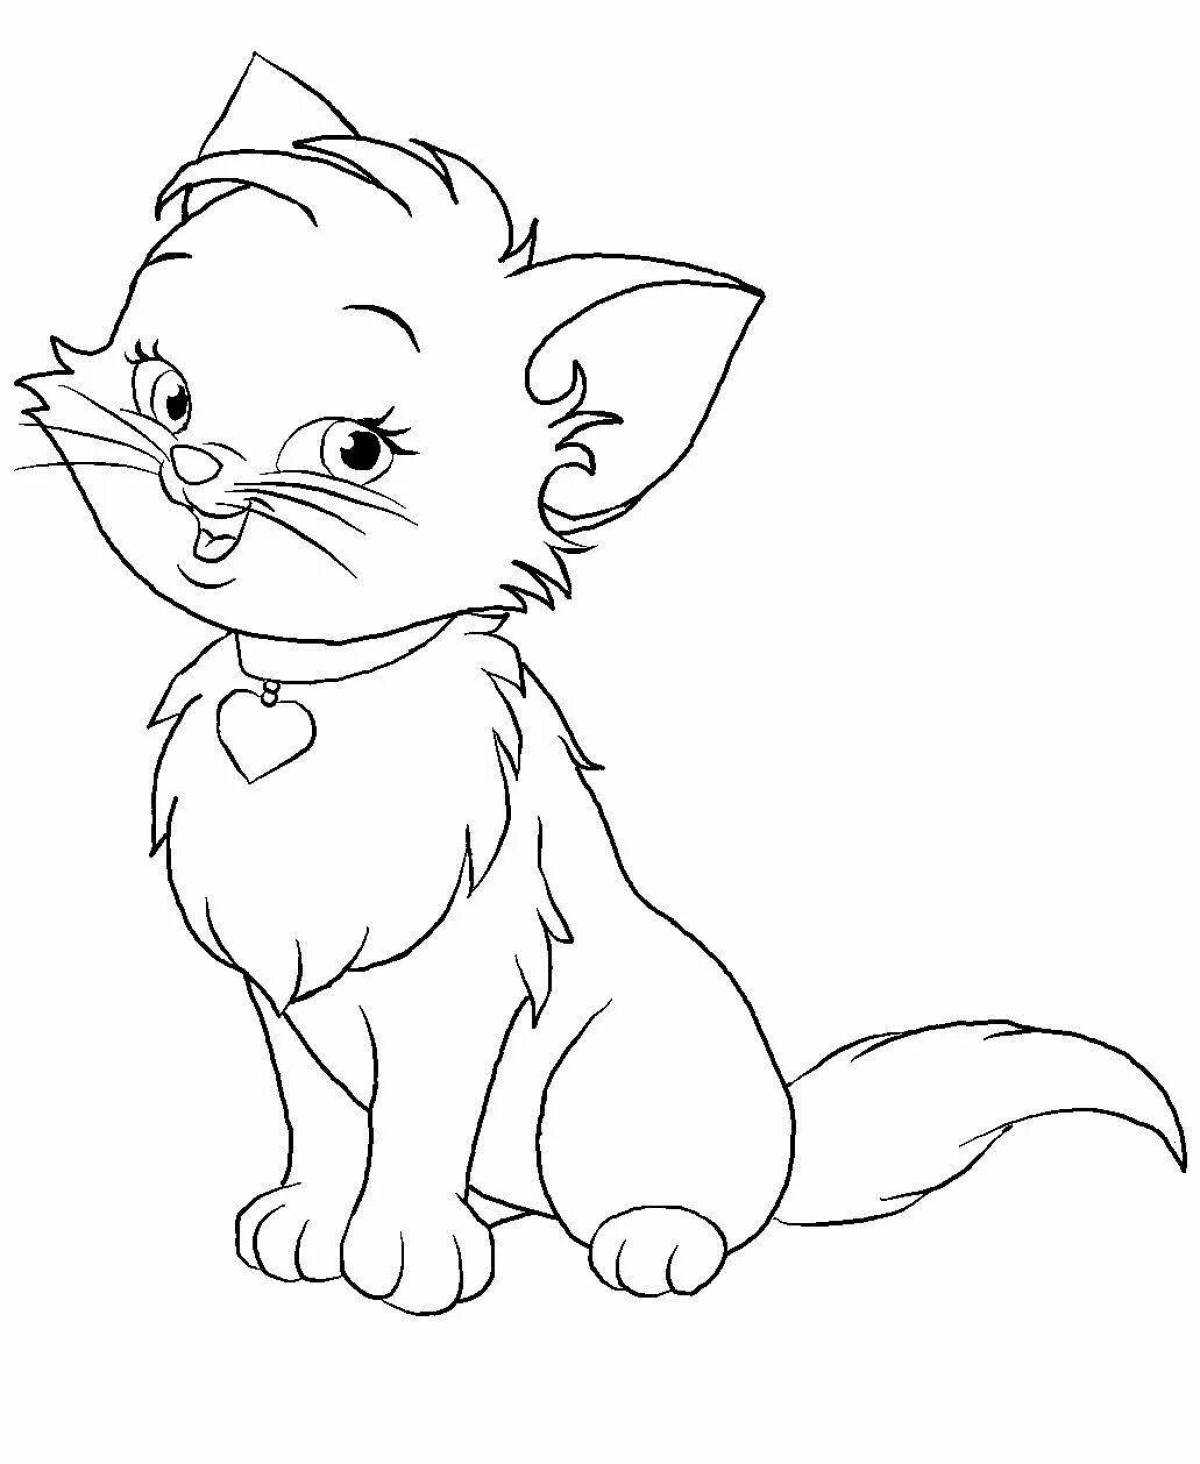 Glittering white cat coloring page